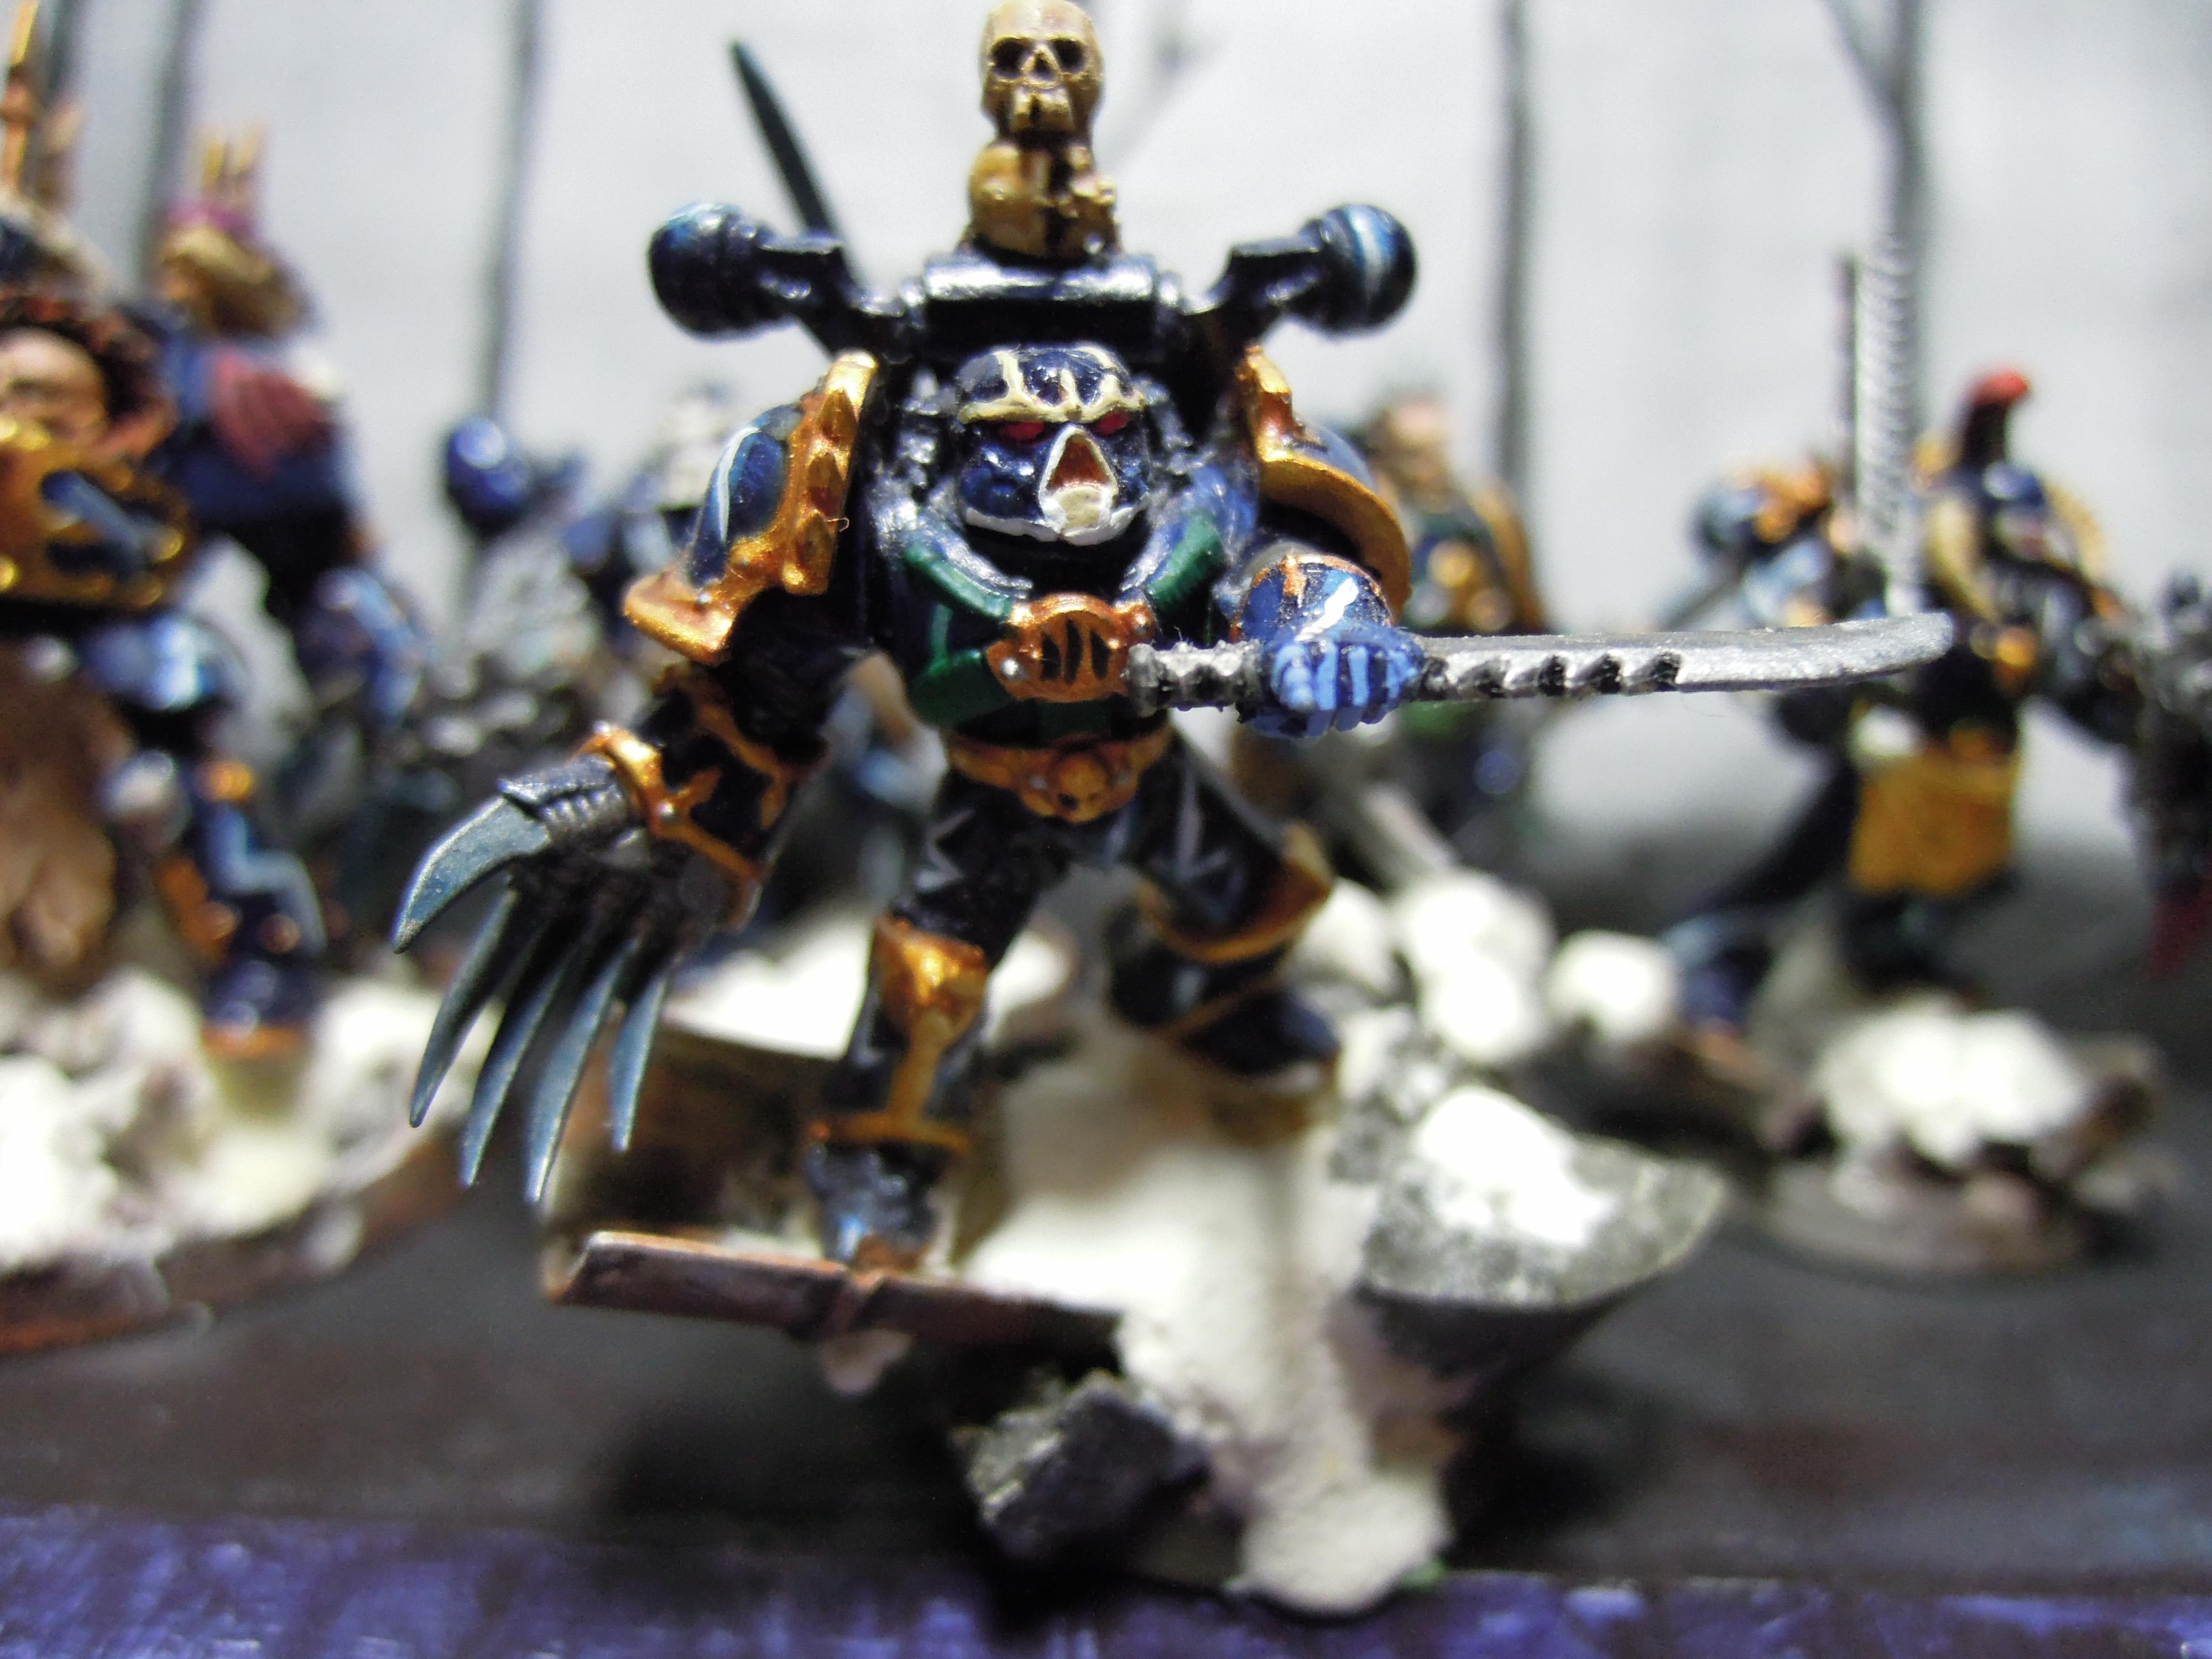 Ave Dominus Nox, Brown Stuff, Chaos, Chaos Space Marines, Chaos Undivided, Conversion, Heresy, Hunter, Infantry, Kitbash, Lightning Claws, Night Lords, Pointing, Snow, Traitor Legions, Warhammer 40,000